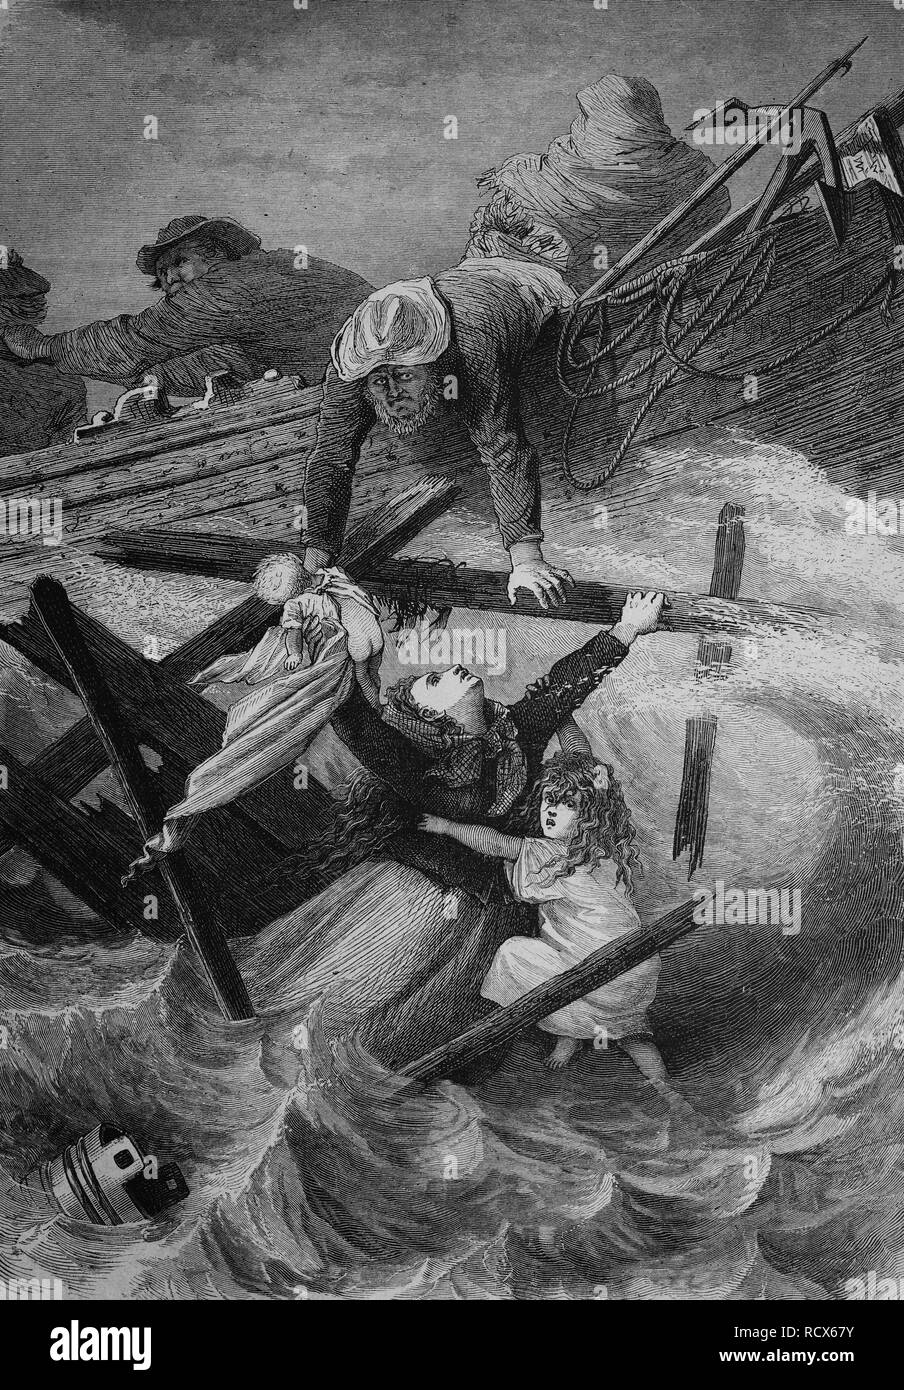 Sea rescue, wood engraving, about 1880 Stock Photo